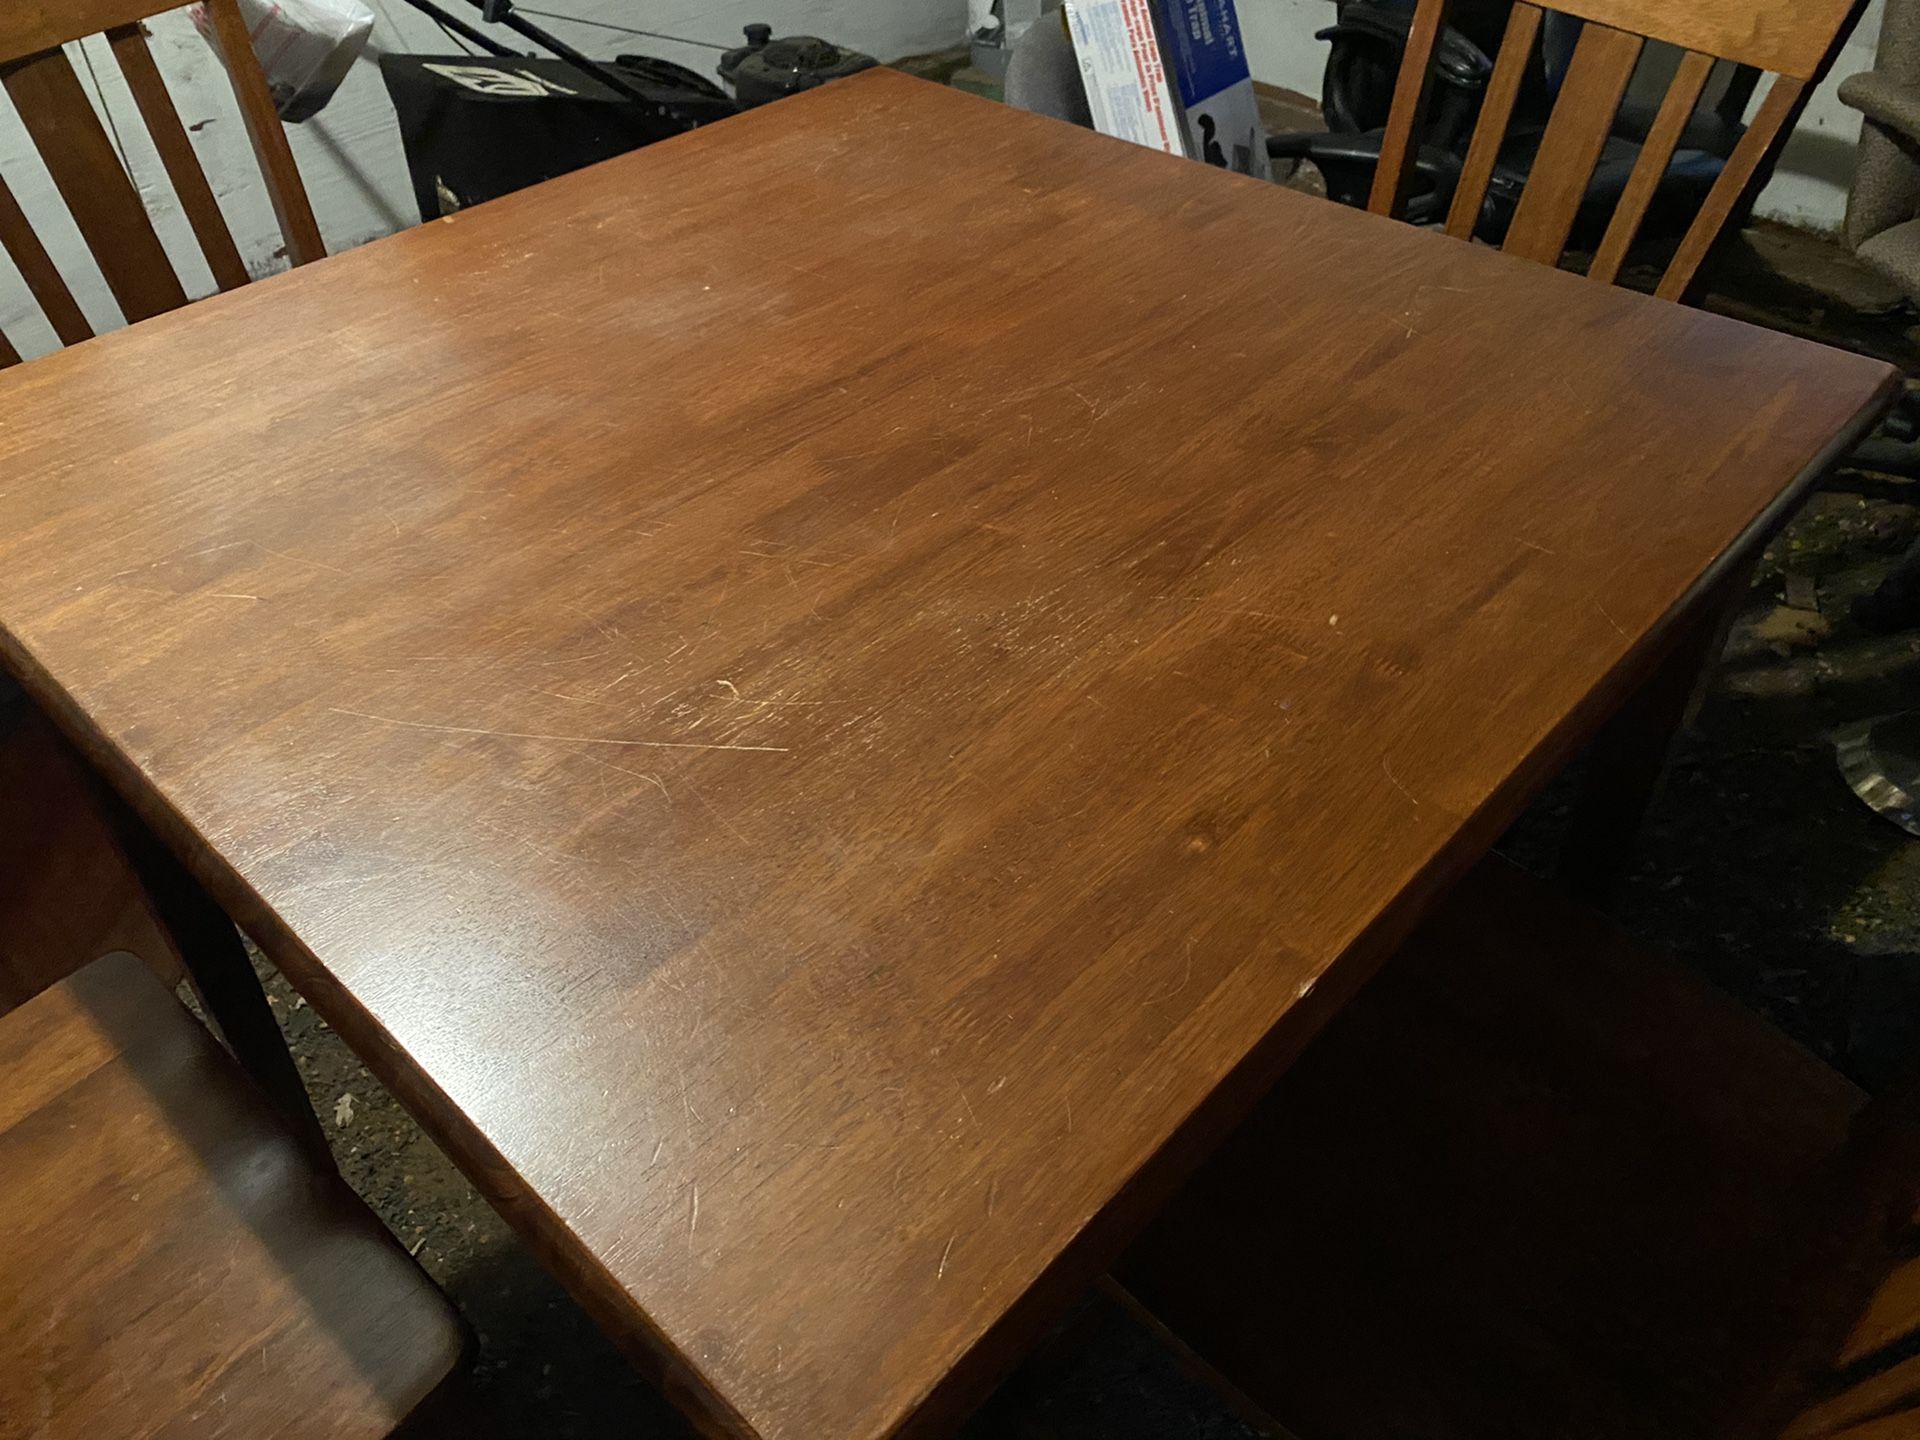 Wooden kitchen table with wooden 4 chairs